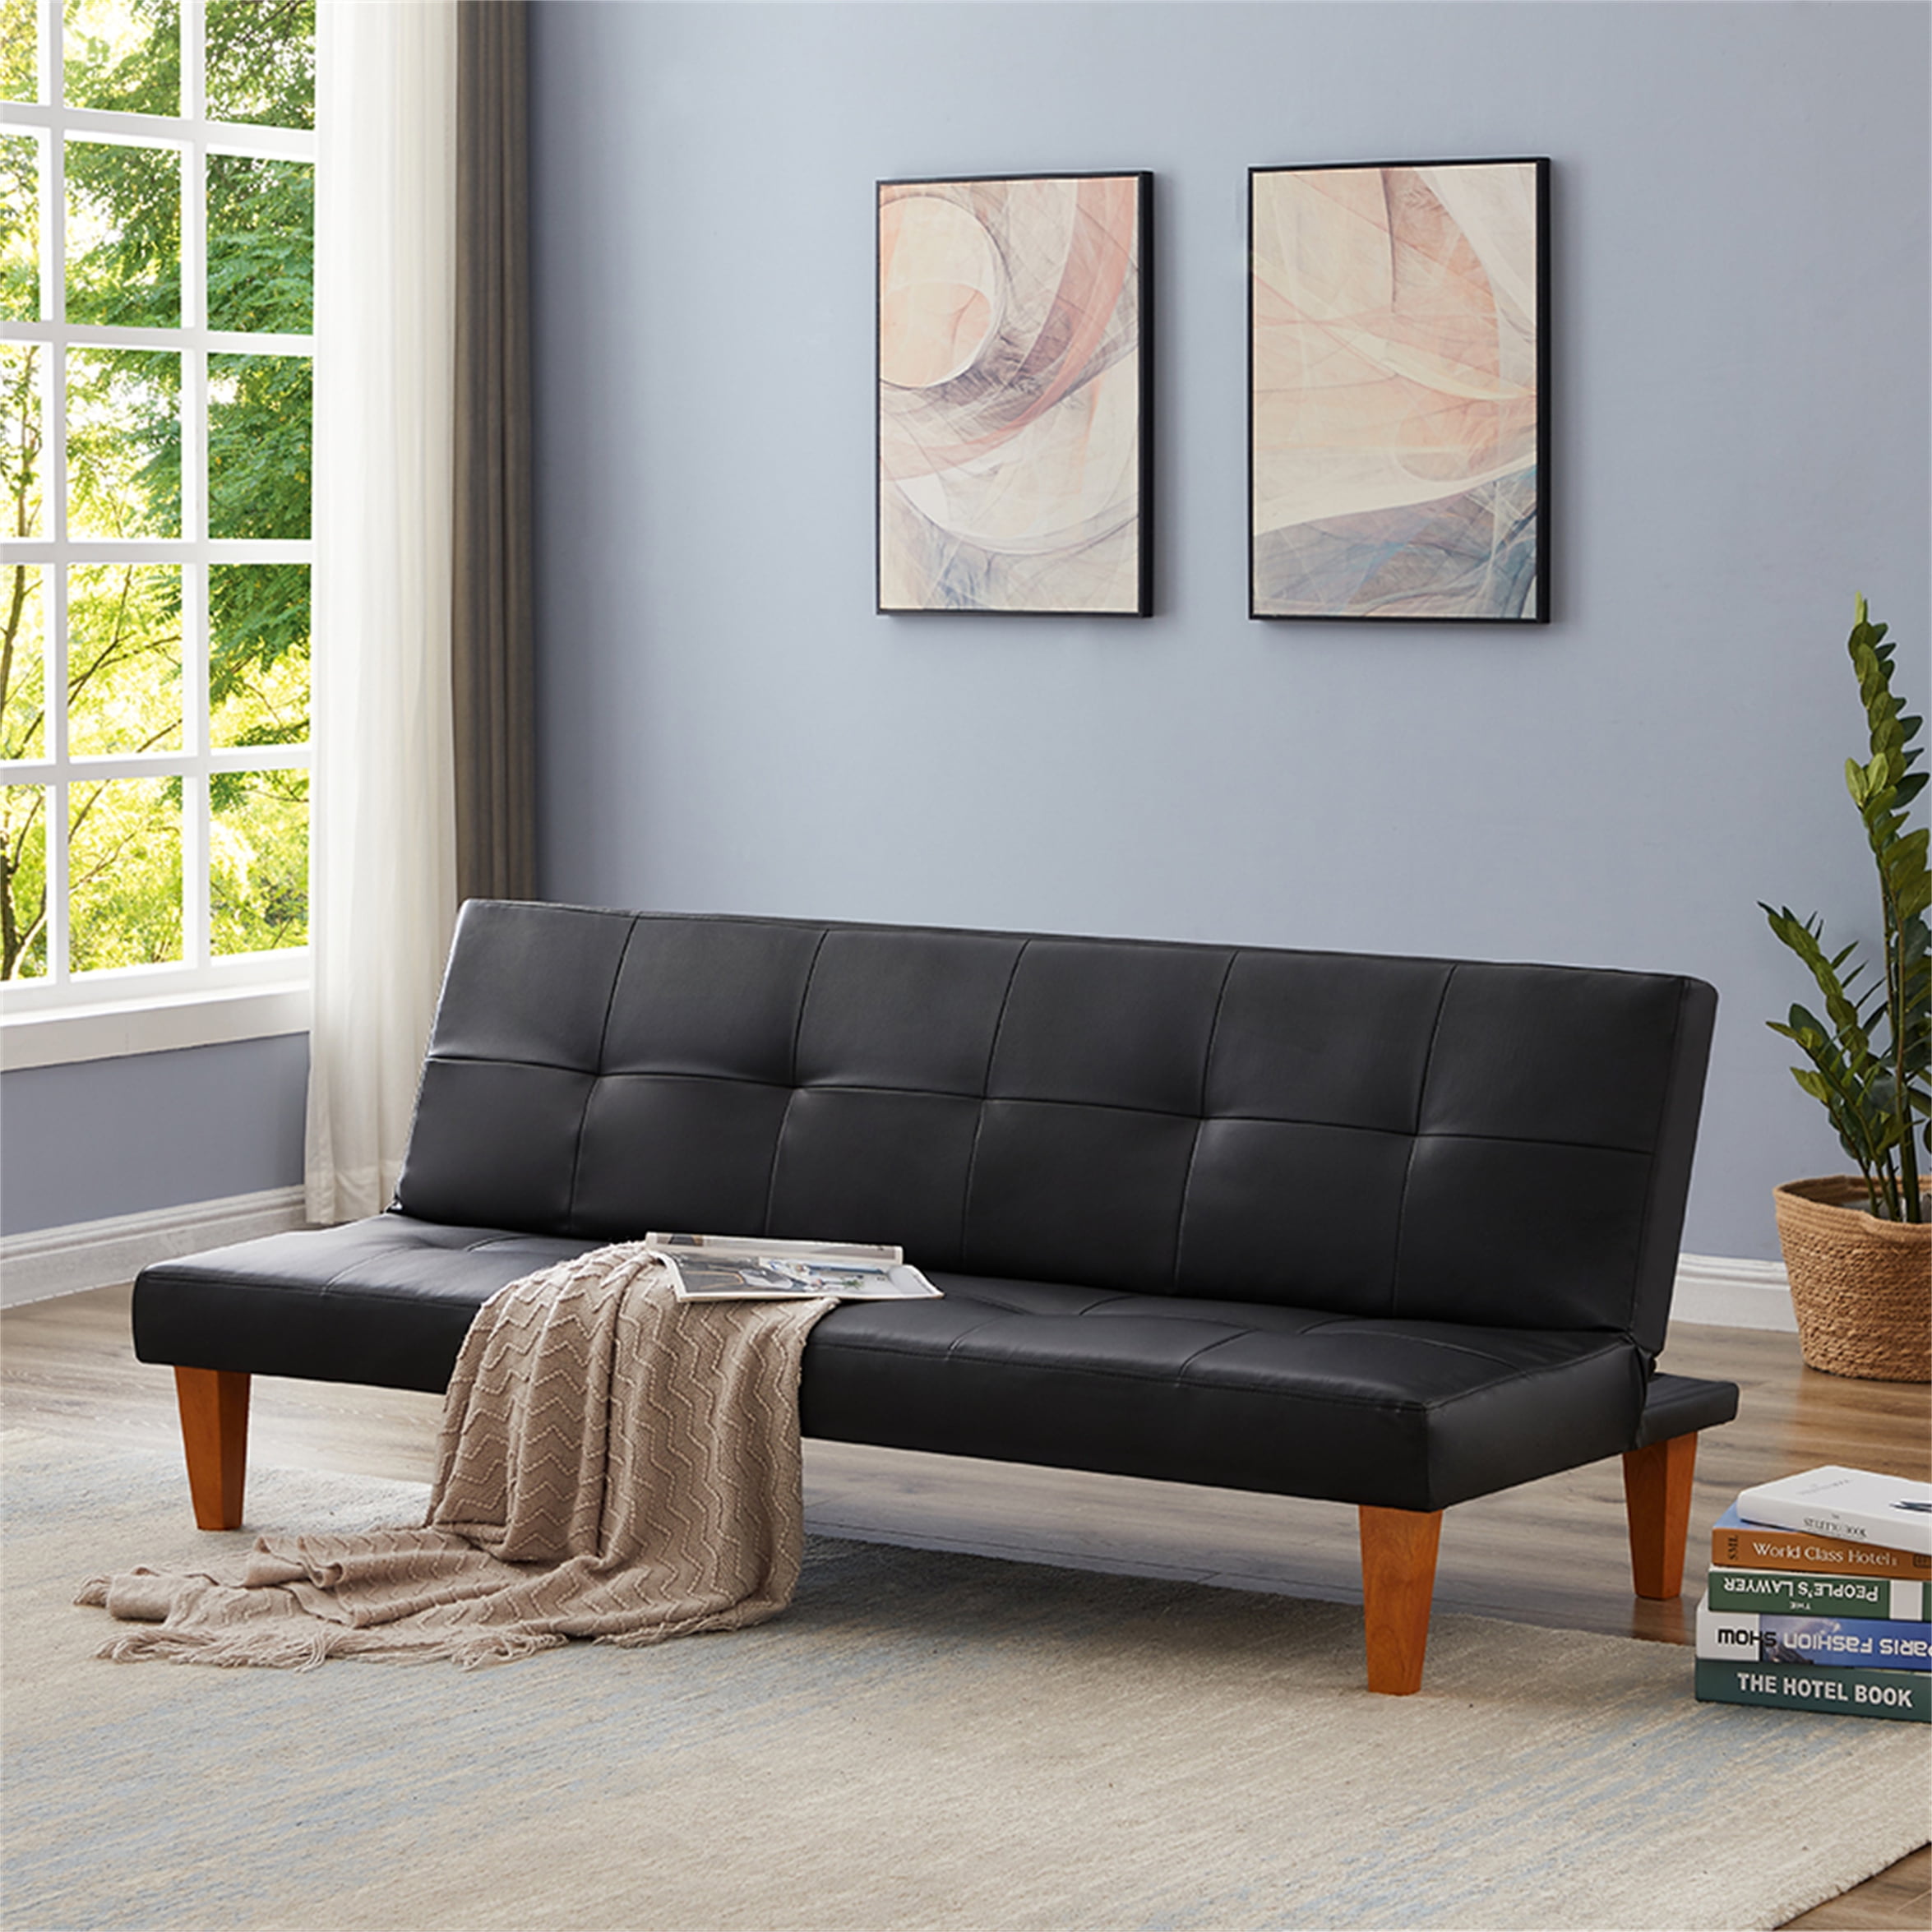 Leather Futon Couch Sleeper Sofa Loveseat Convertible Sectional Bed Chair Swede 